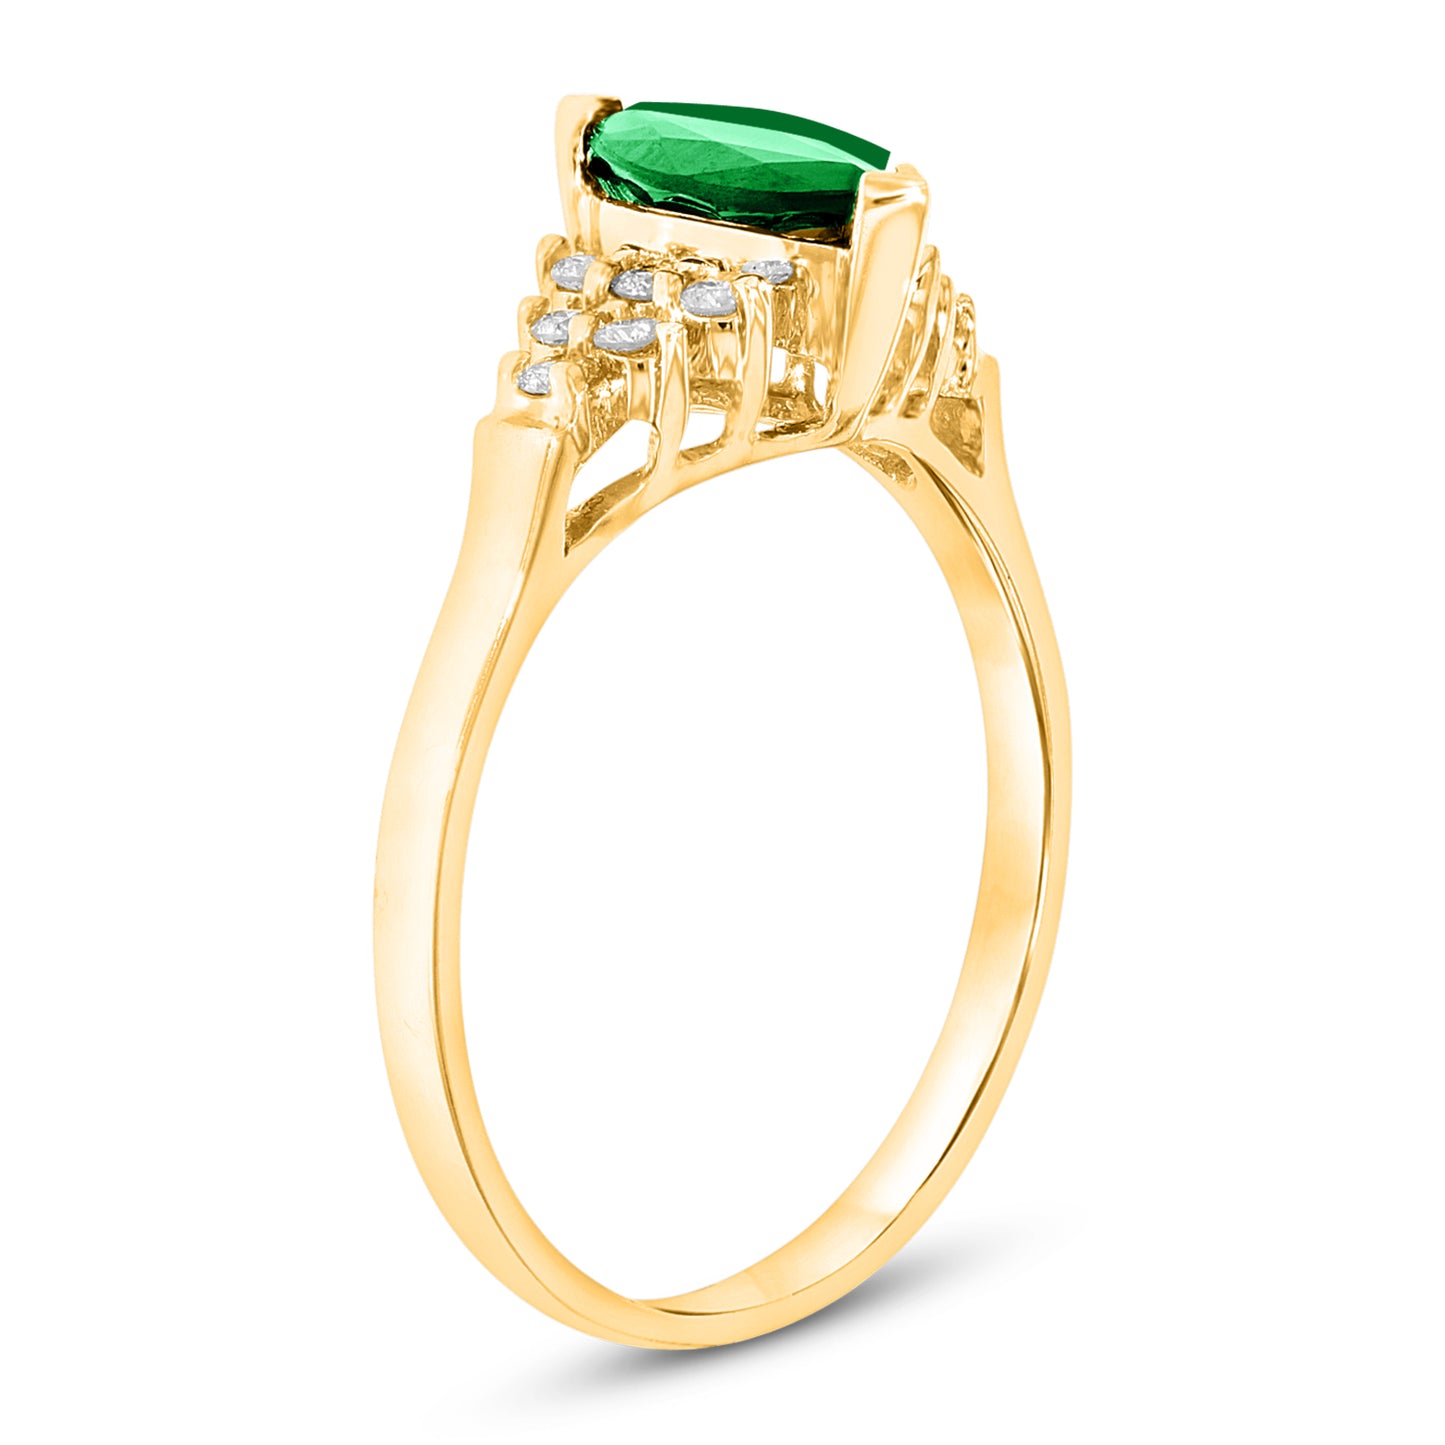 2/3ct Marquise-Cut Emerald & Diamond Ring in 14k White Gold